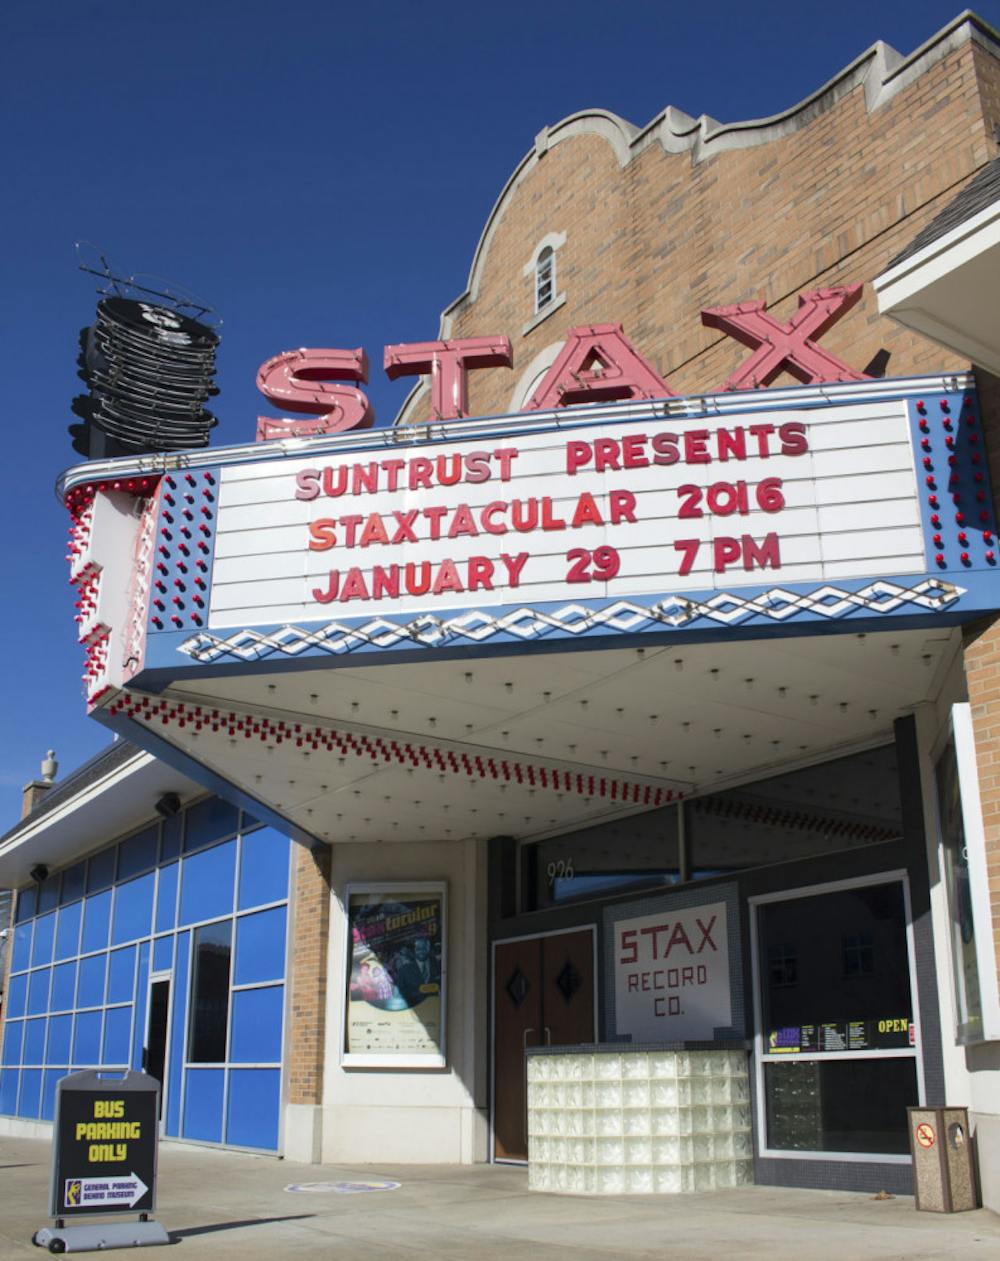 <p class="p1">Stax Museum, located at 926 E. McLemore Ave, is collaborating with Indie Memphis on a film series this spring. All of the films in the series will star Stax alumnus Isaac Hayes.</p>